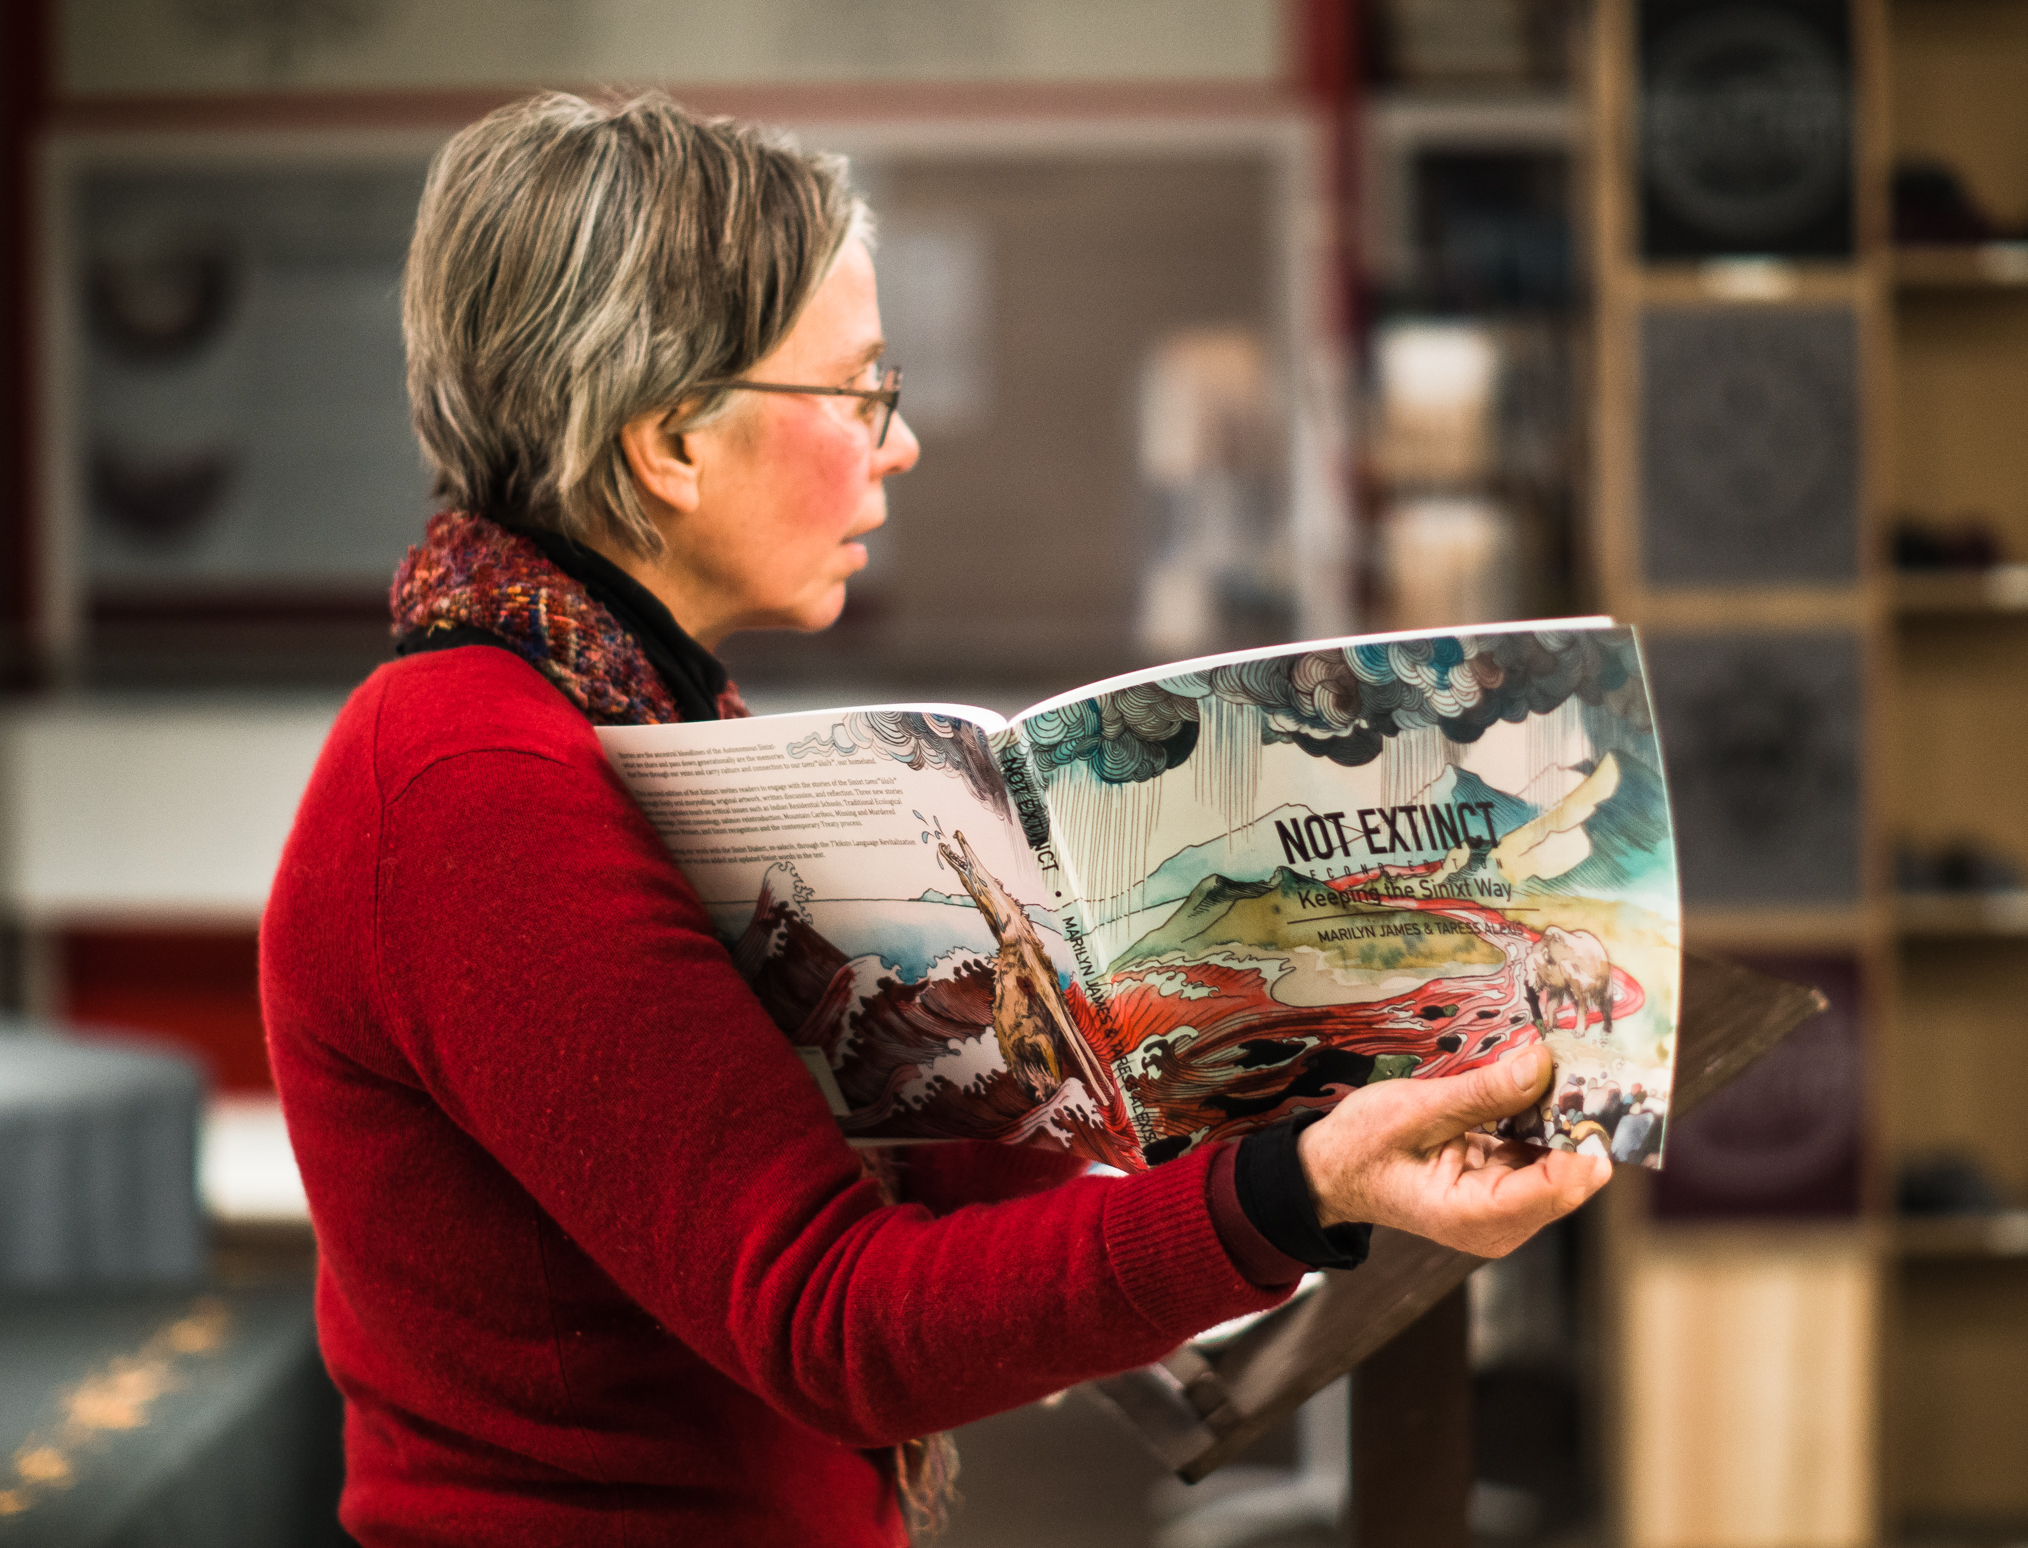 Maa Press Publisher K.L. Kivi presents the scond edition of the book Note Extinct: Keeping the Sinixt Way at the Rossland Museum and Discovery Centre on February 4, 2022. Photo by Louis Bockner.